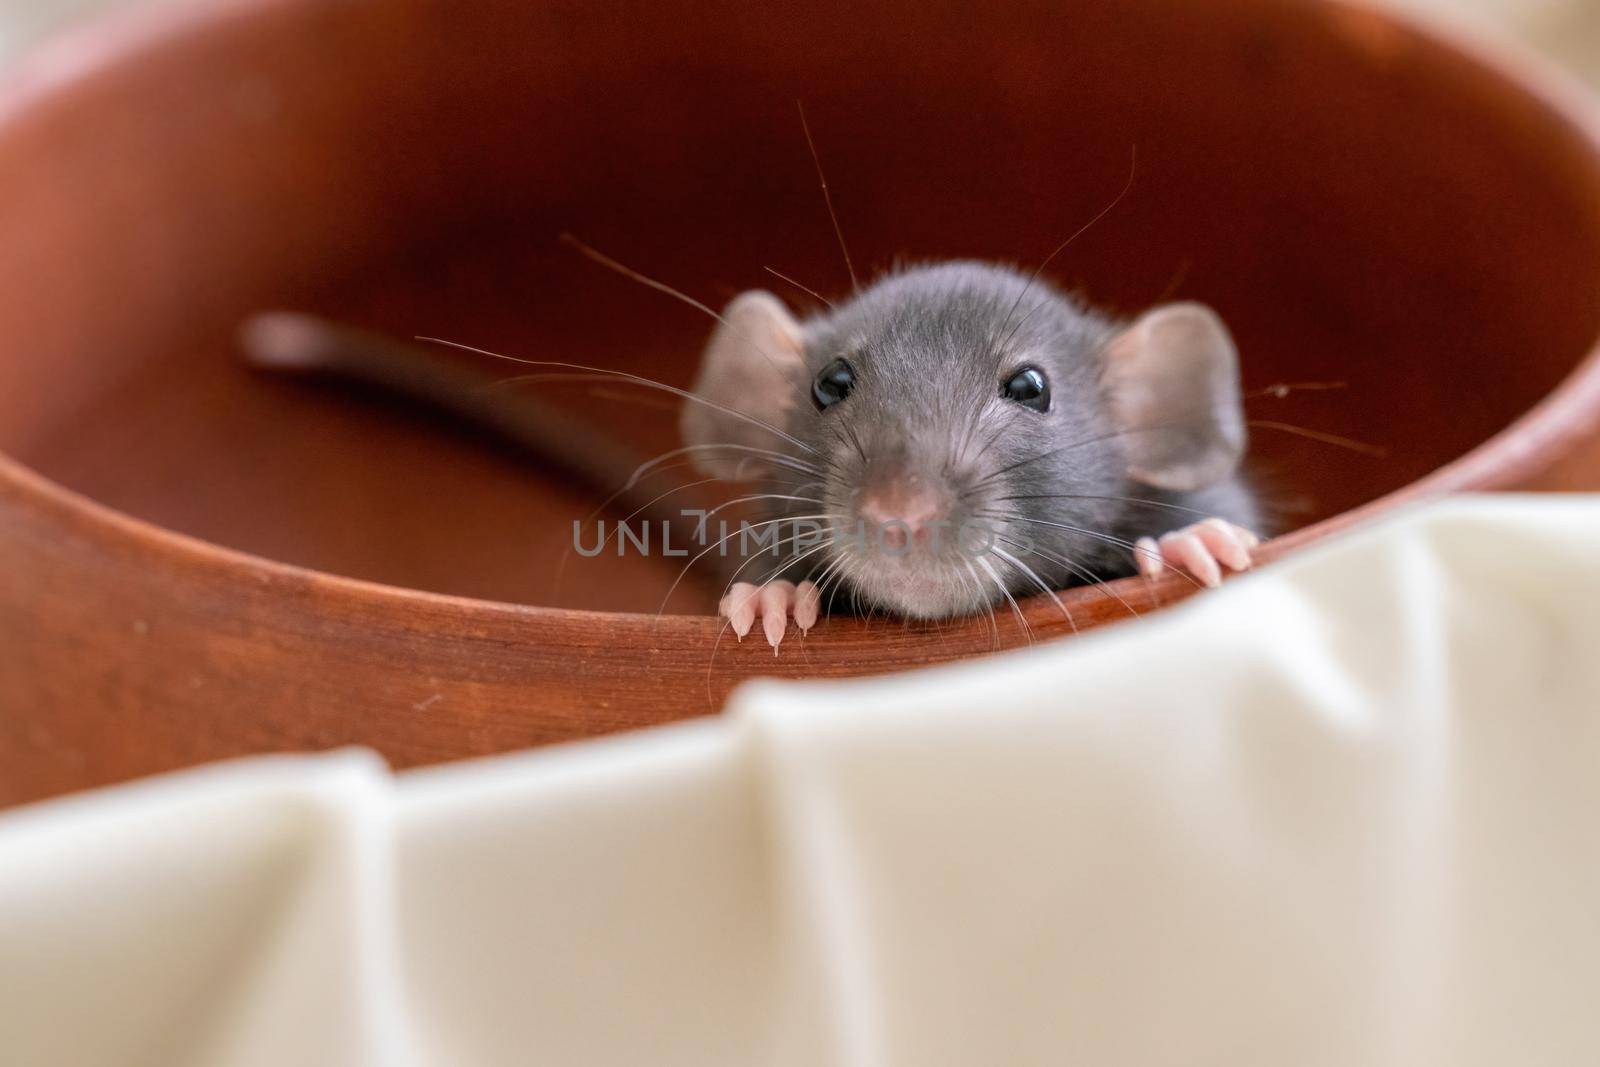 The head of a gray Dumbo rat on a white background, she sits in a clay plate and looks out, putting her front paws on the edge.